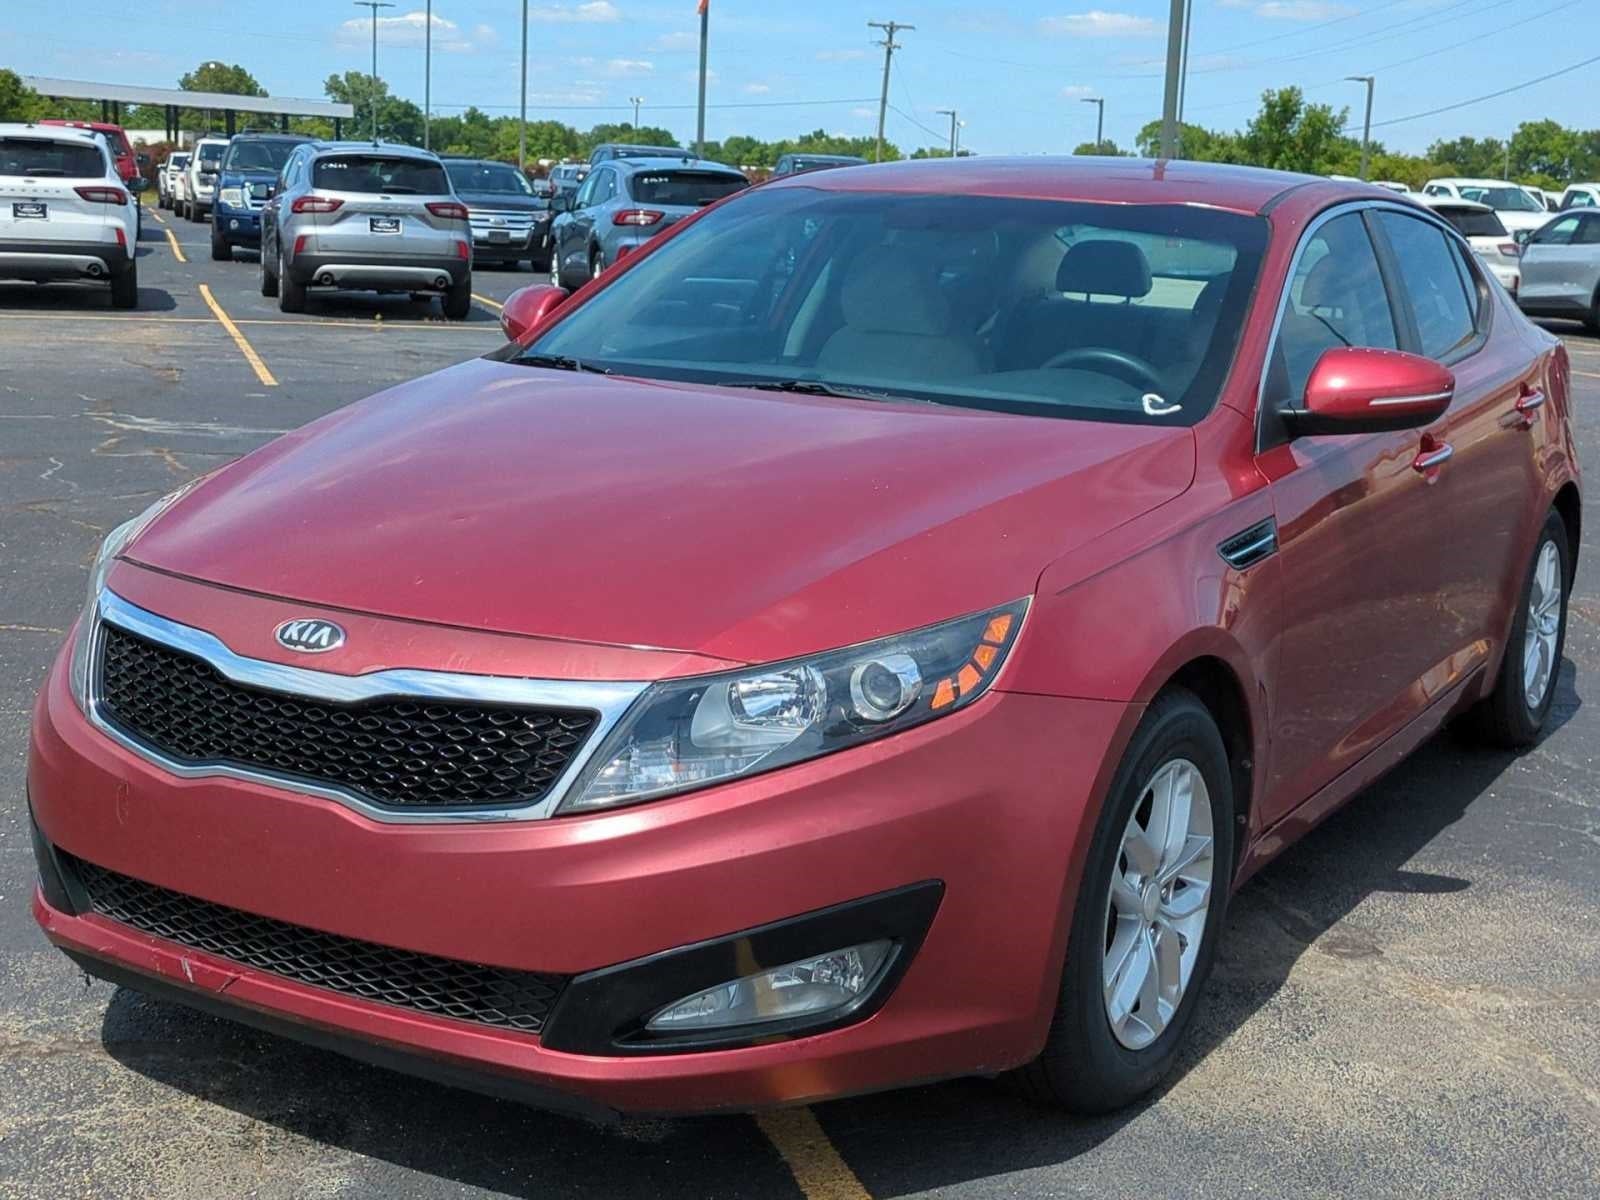 Used 2013 Kia Optima LX with VIN 5XXGM4A72DG243013 for sale in West Memphis, AR